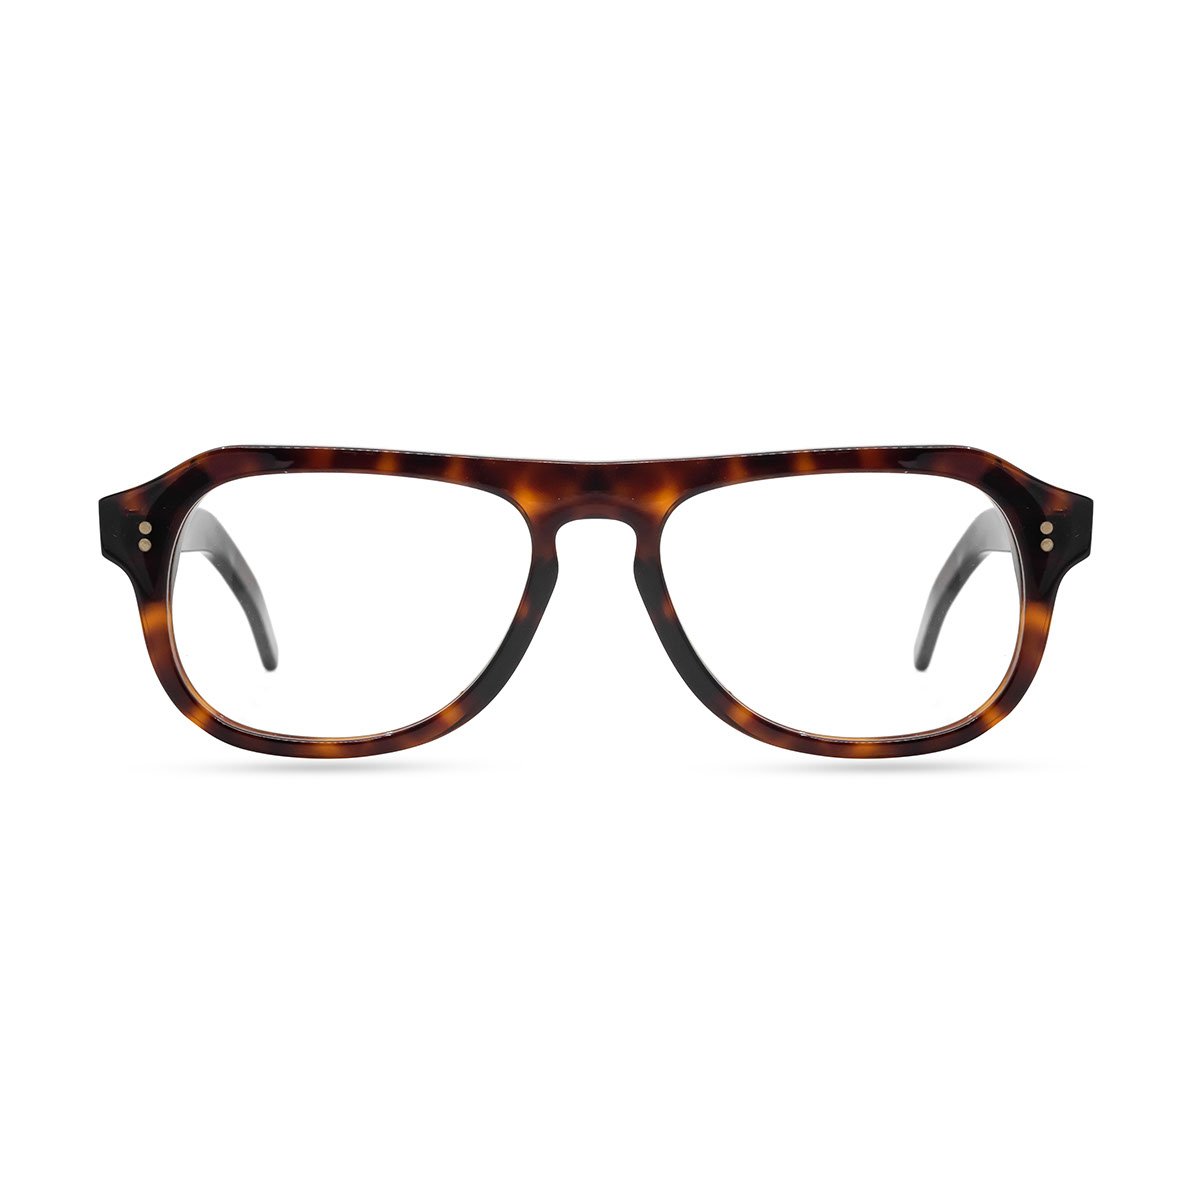 CUTLER AND GROSS M:0822/2 C:DT01 spectacle-frame